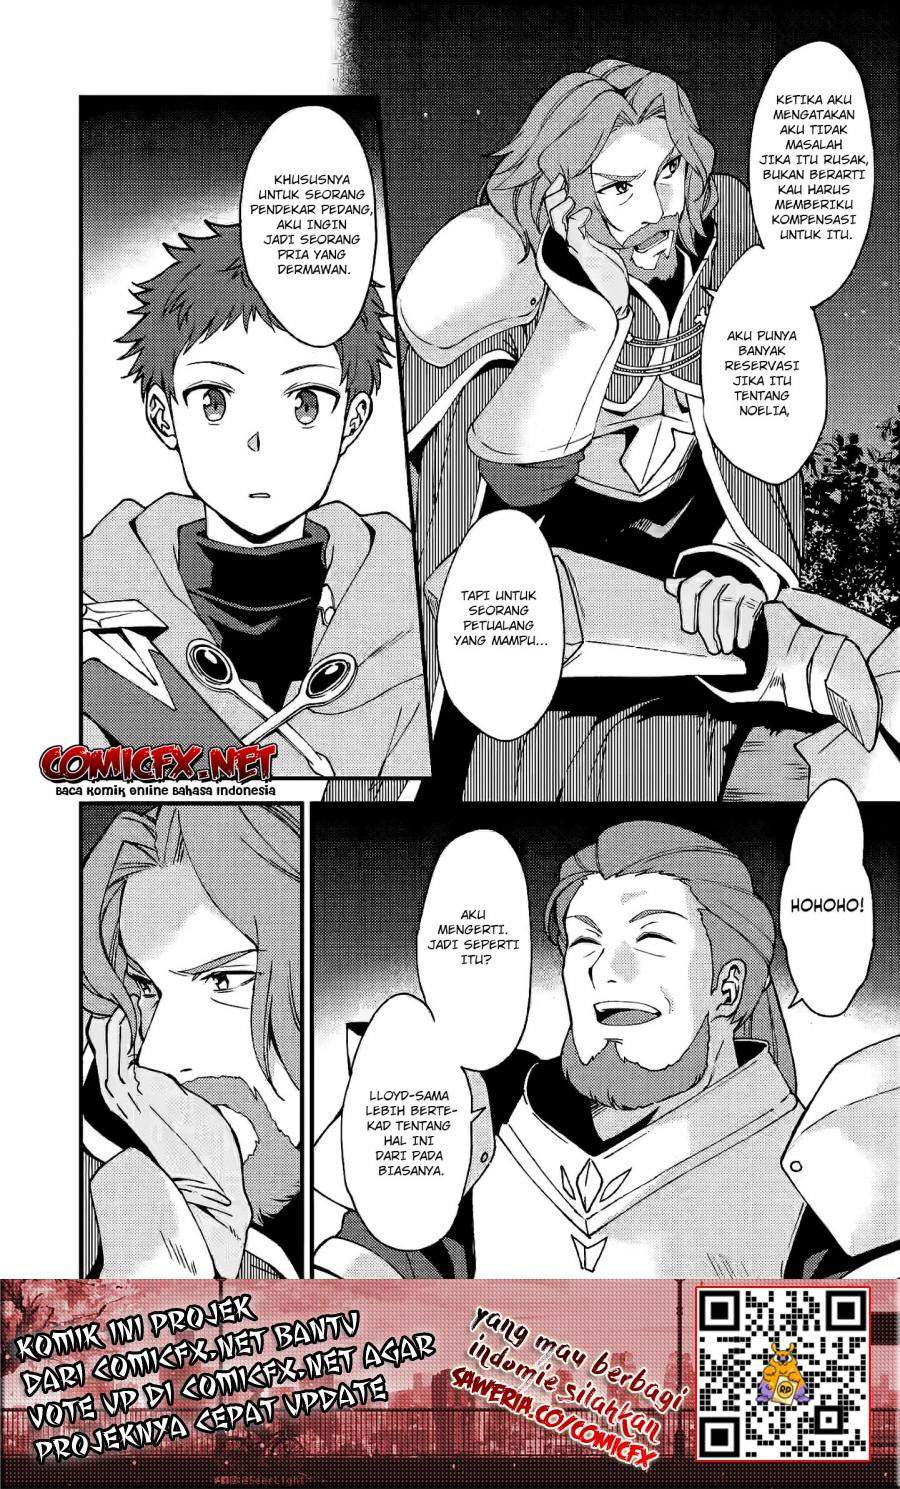 A Sword Master Childhood Friend Power Harassed Me Harshly, So I Broke off Our Relationship and Make a Fresh Start at the Frontier as a Magic Swordsman Chapter 6.2